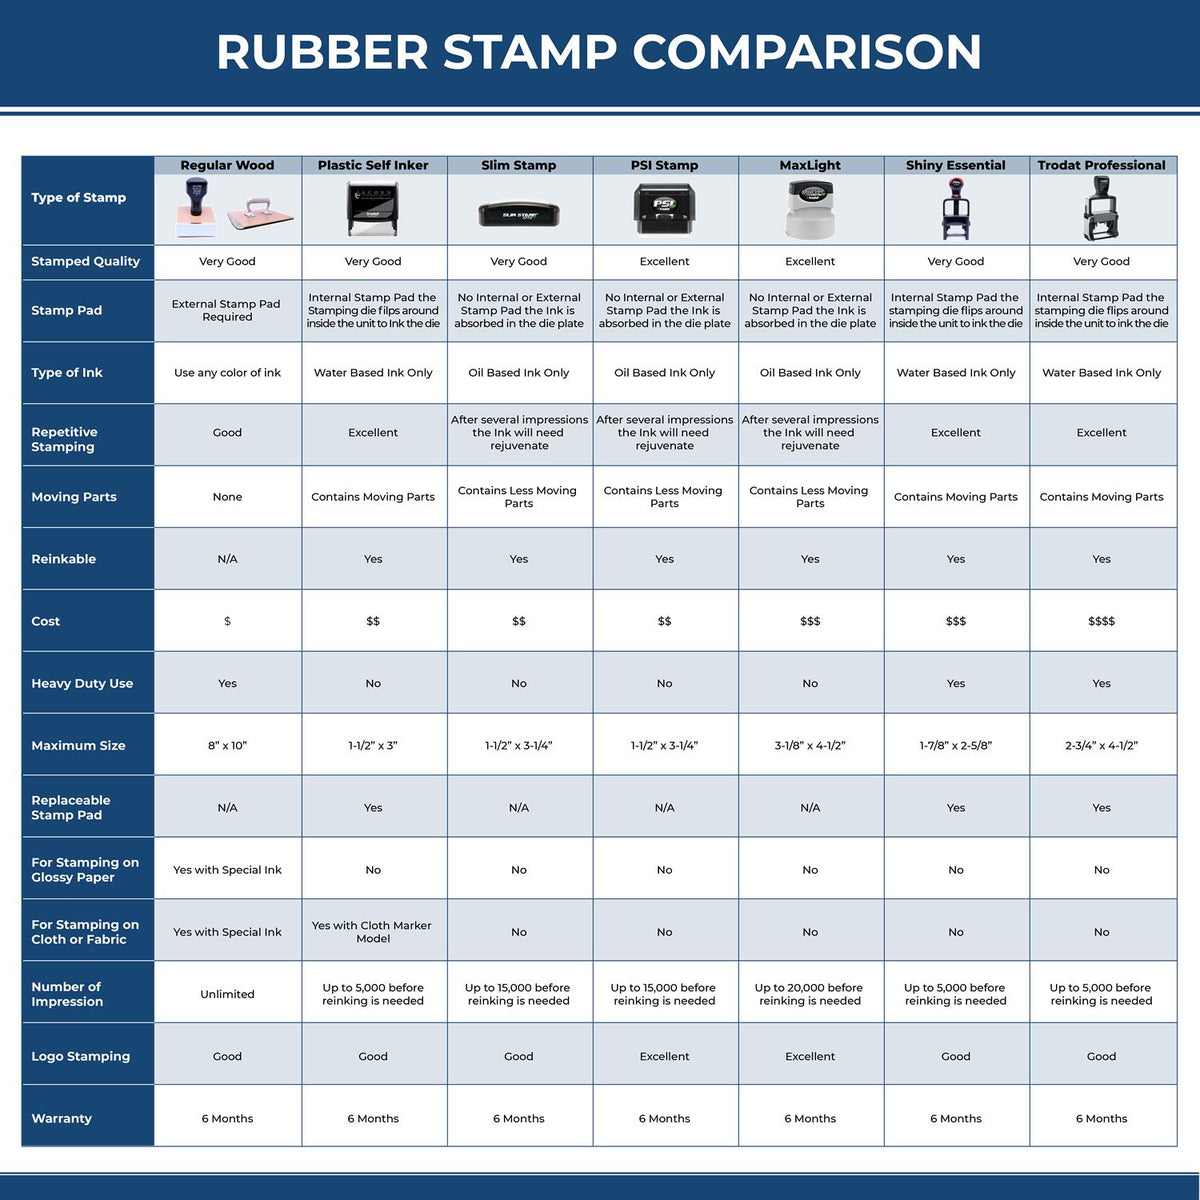 Large Self Inking Air Mail Stamp 4102S Rubber Stamp Comparison